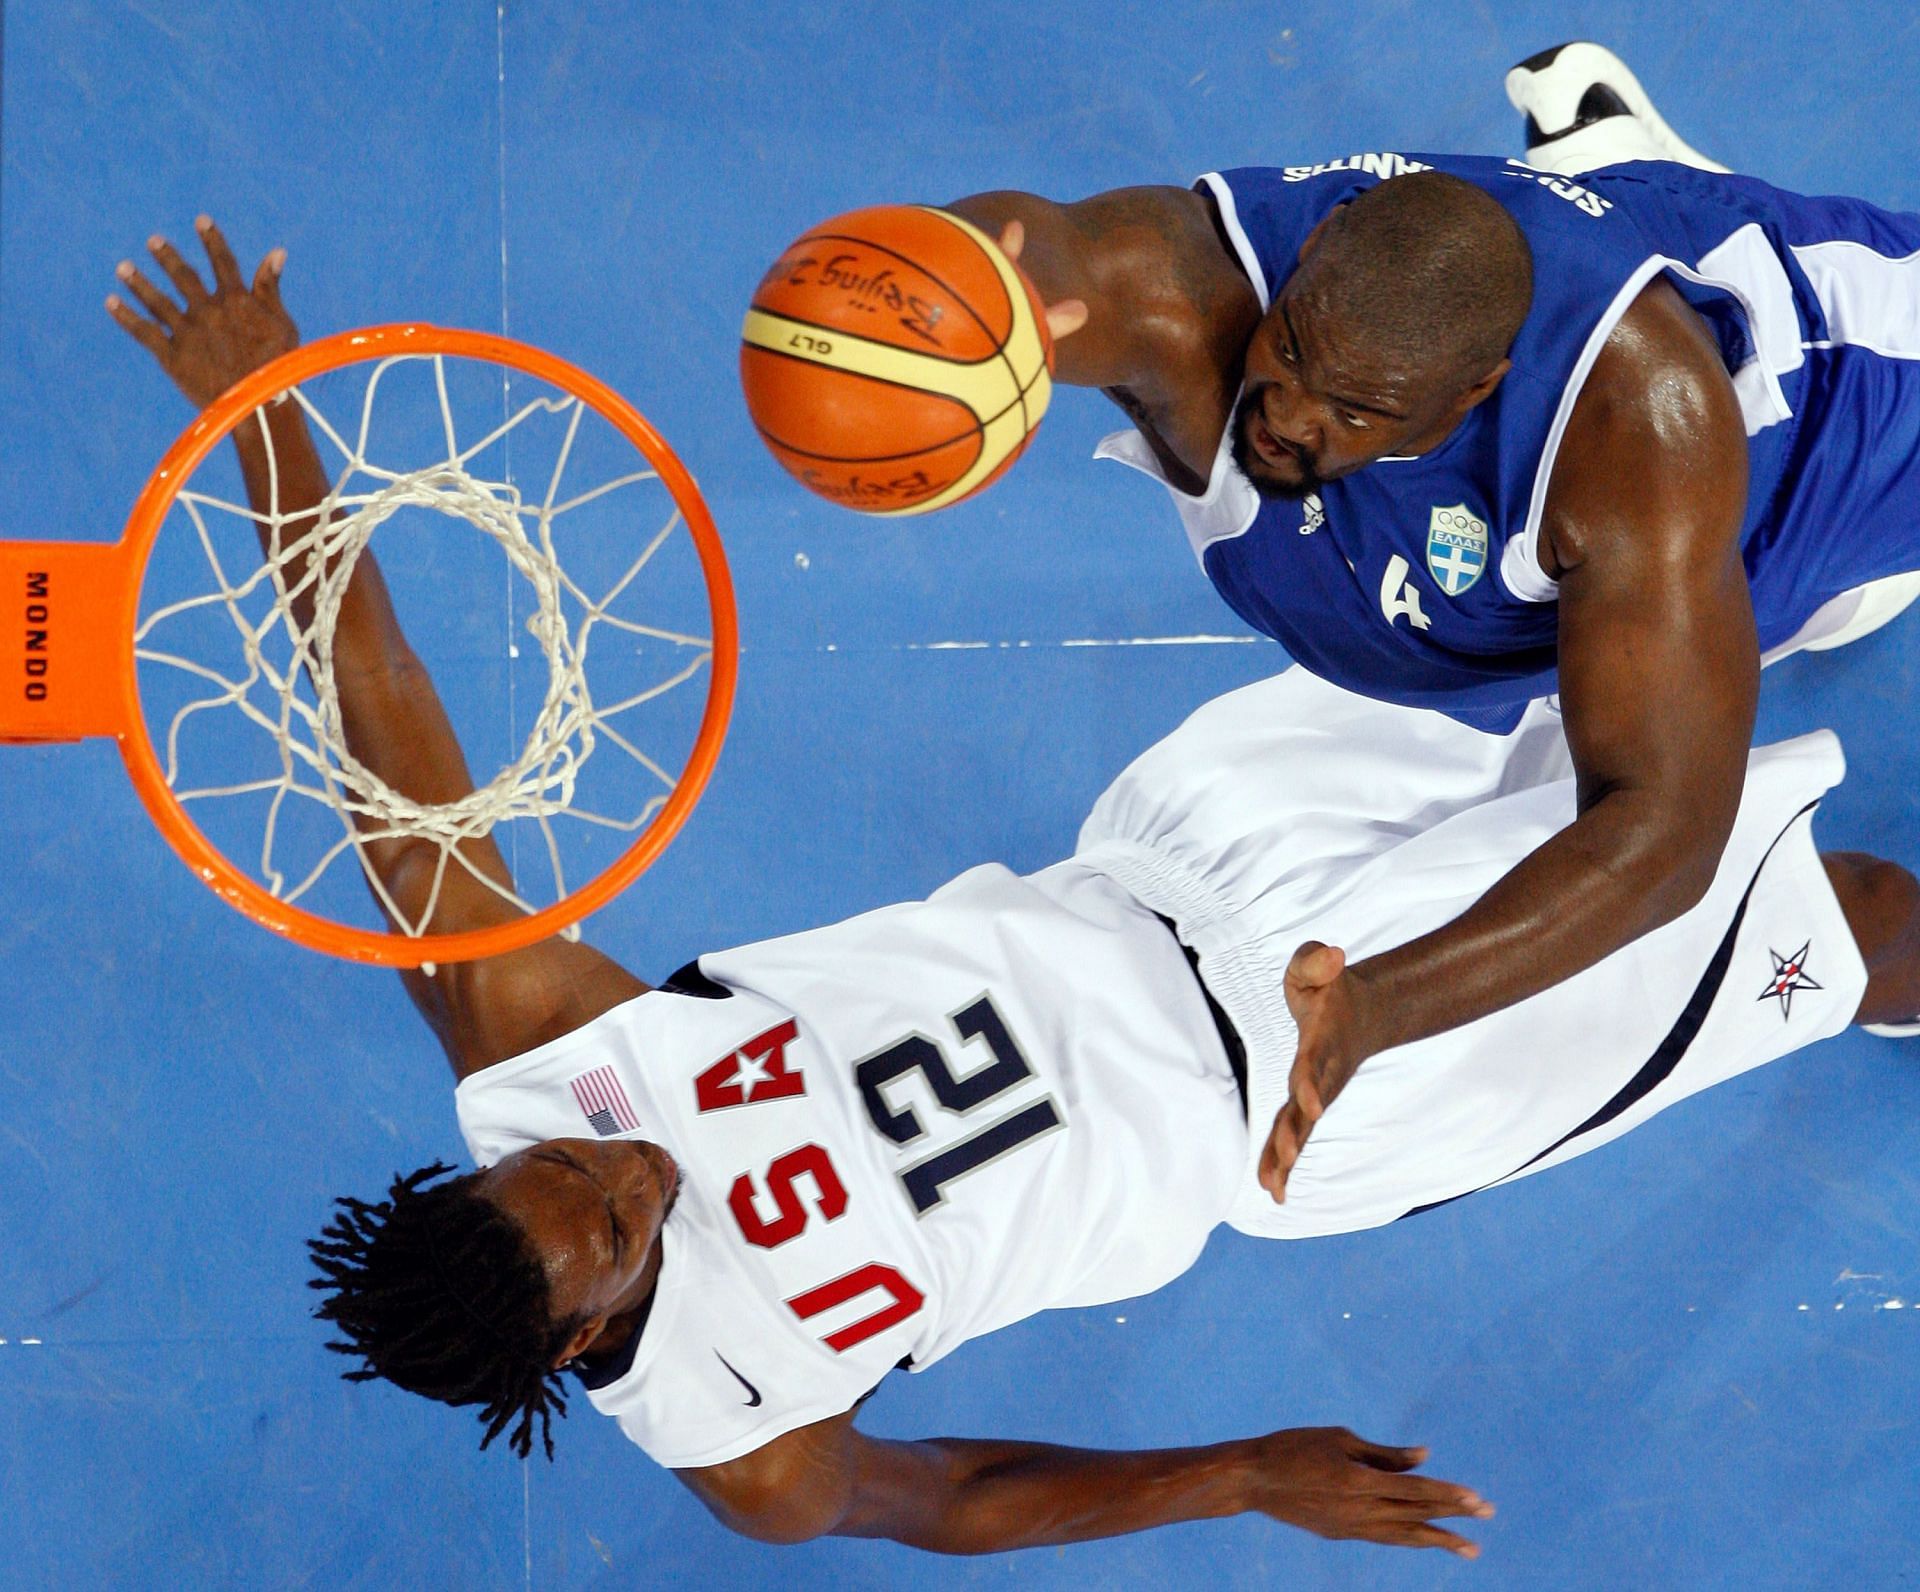 Baby Shaq scored 14 points against Team USA (Image via Getty Images)